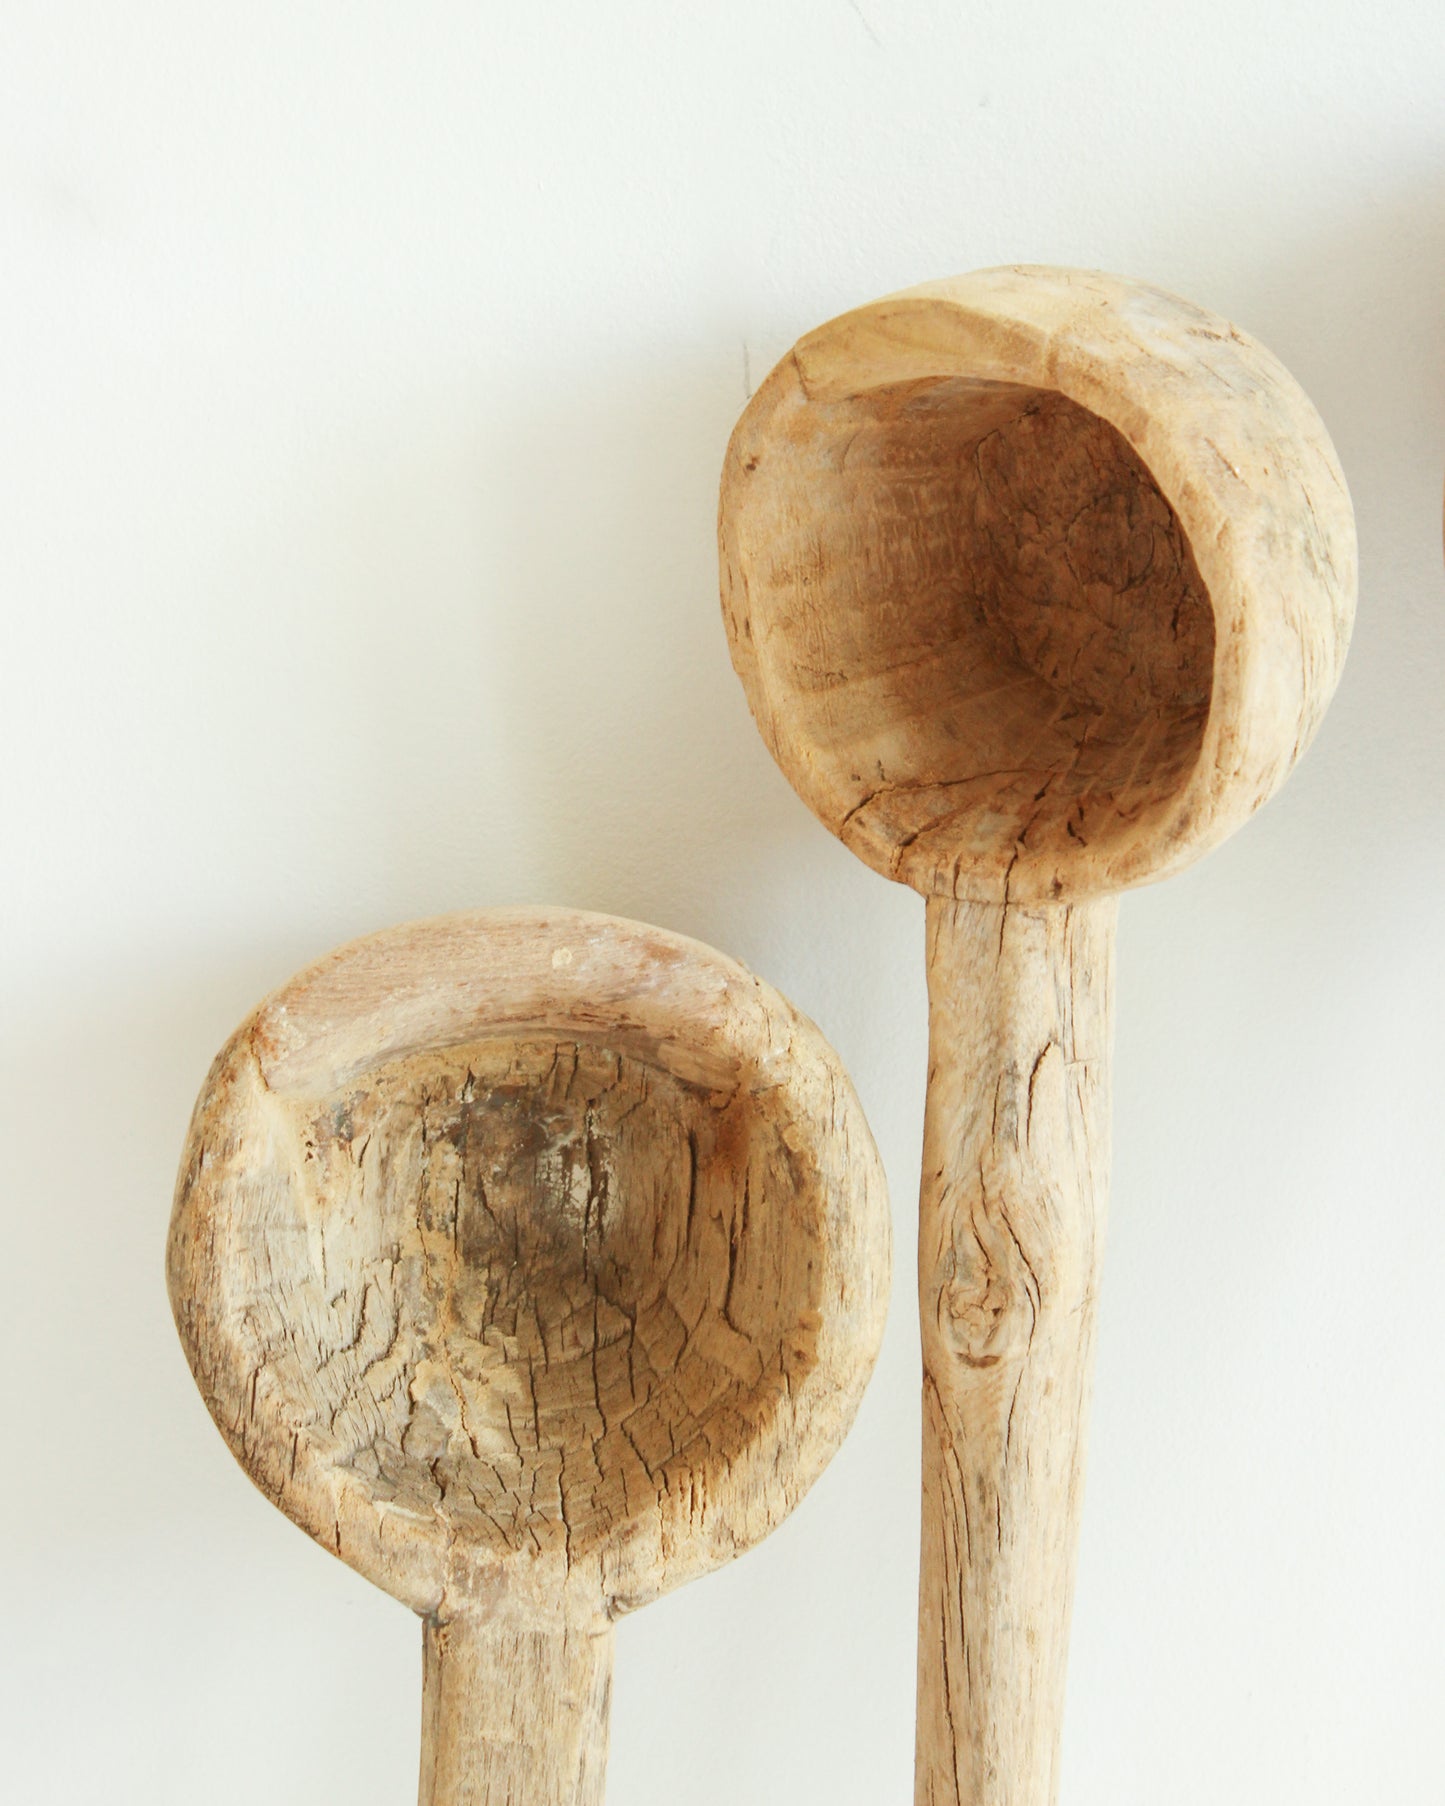 Vintage Rustic Wooden Decorative Spoon // BLEACHED